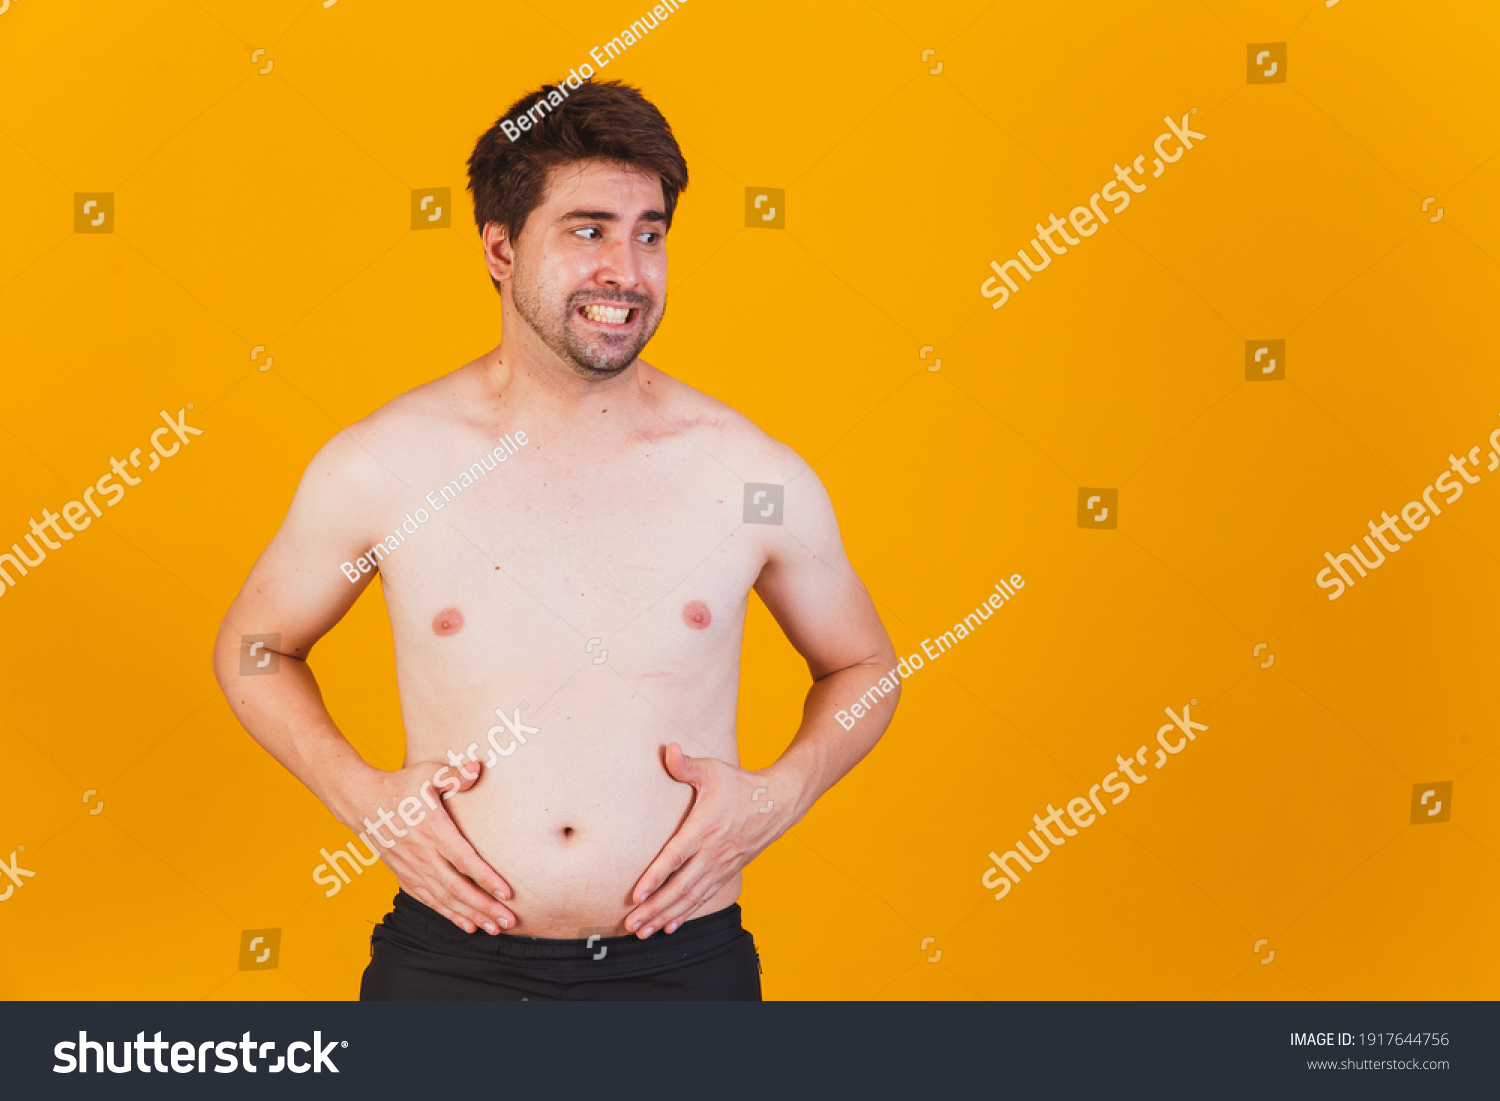 Man Touching His Fat Belly Close Stock Photo 1917644756 Shutterstock